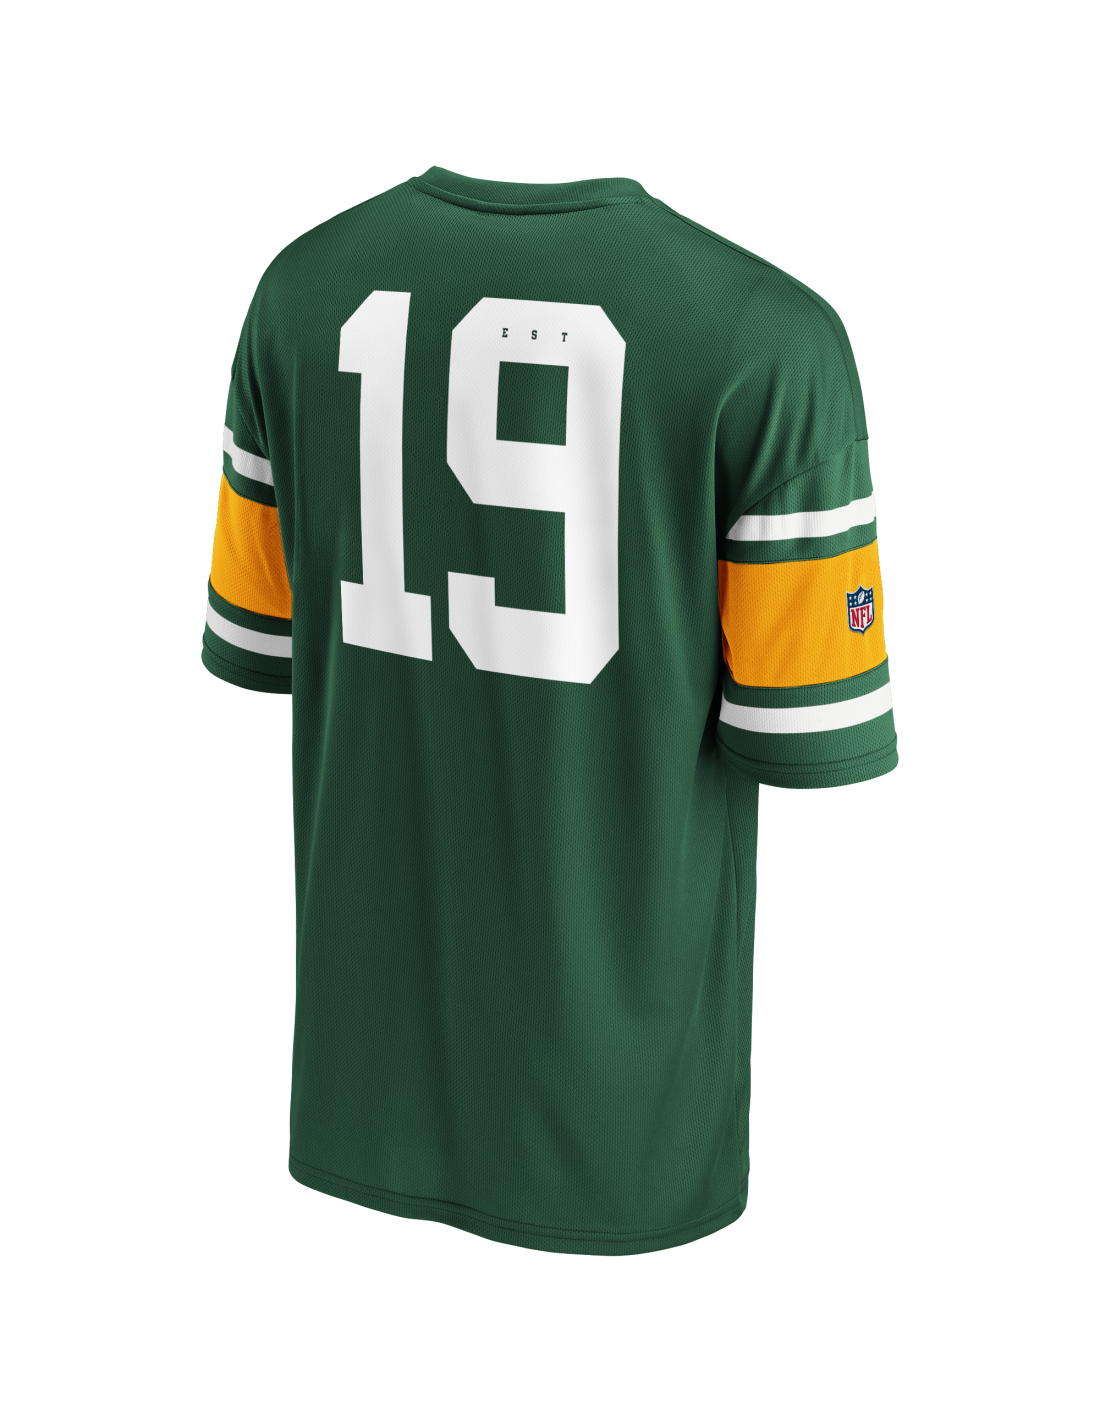 Green Bay Packers Foundation Supporters Jersey